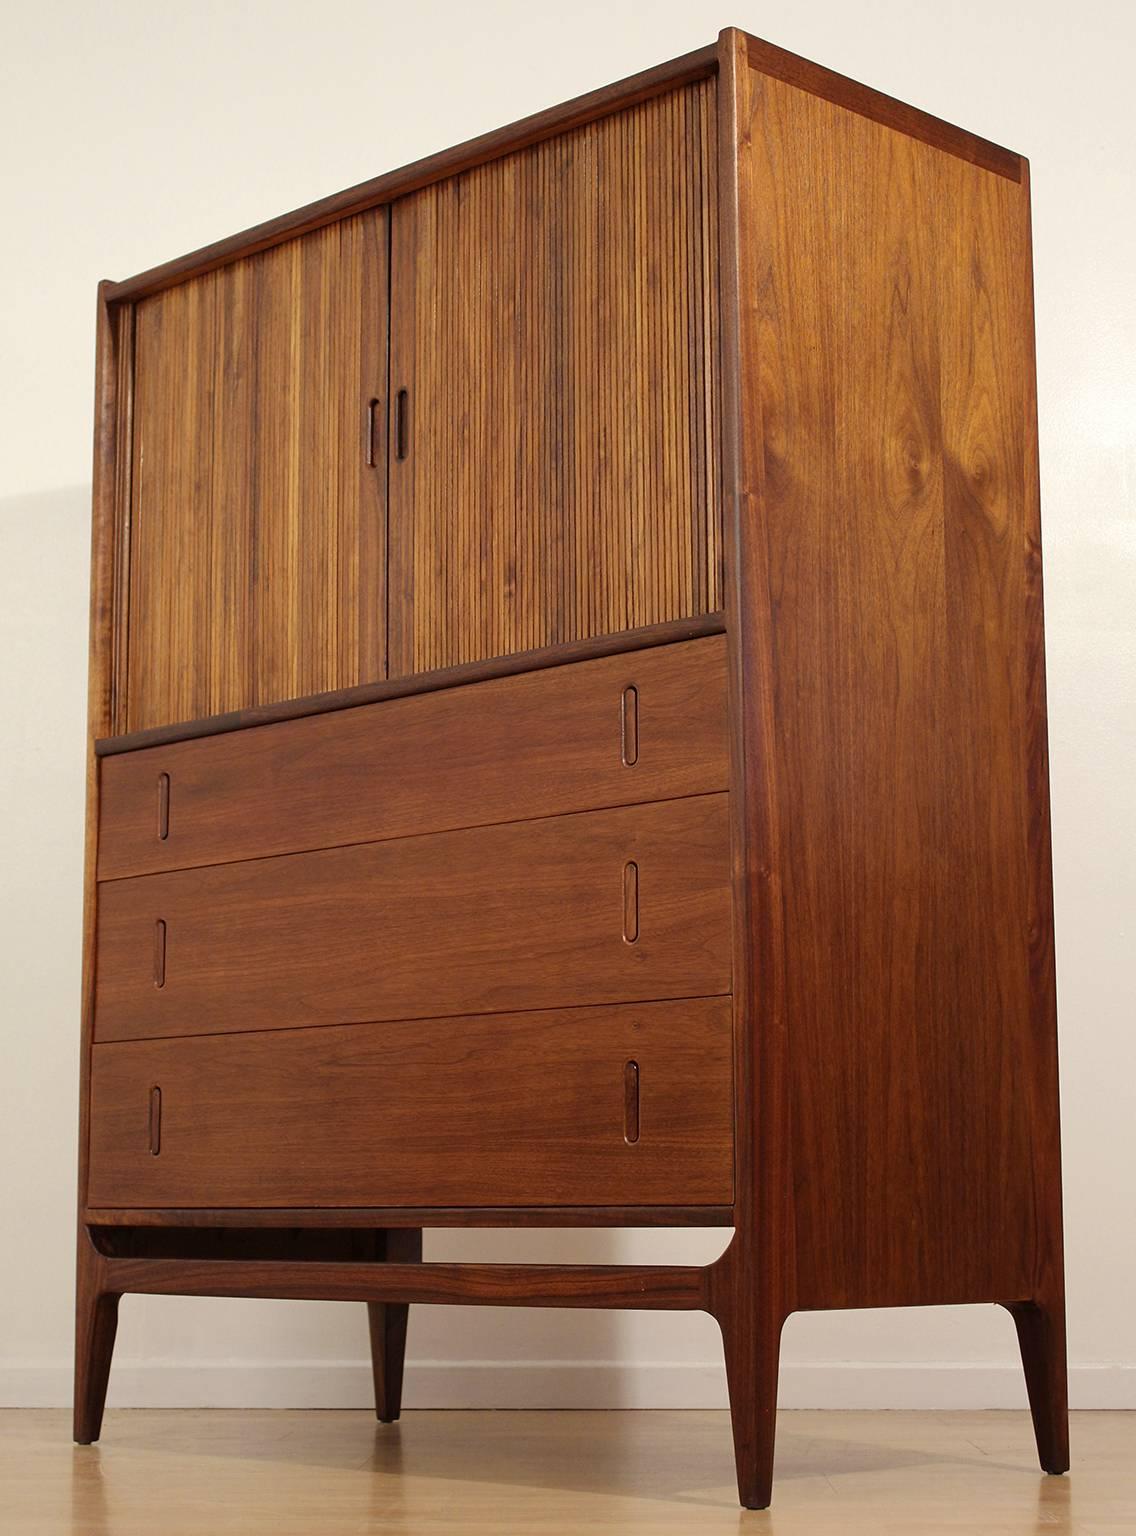 Glenn of California dresser or gentleman's chest designed by Richard Thompson. Top features tabor doors and a beautiful modernist design. Made of stunning walnut with rosewood pulls. Excellent vintage condition.